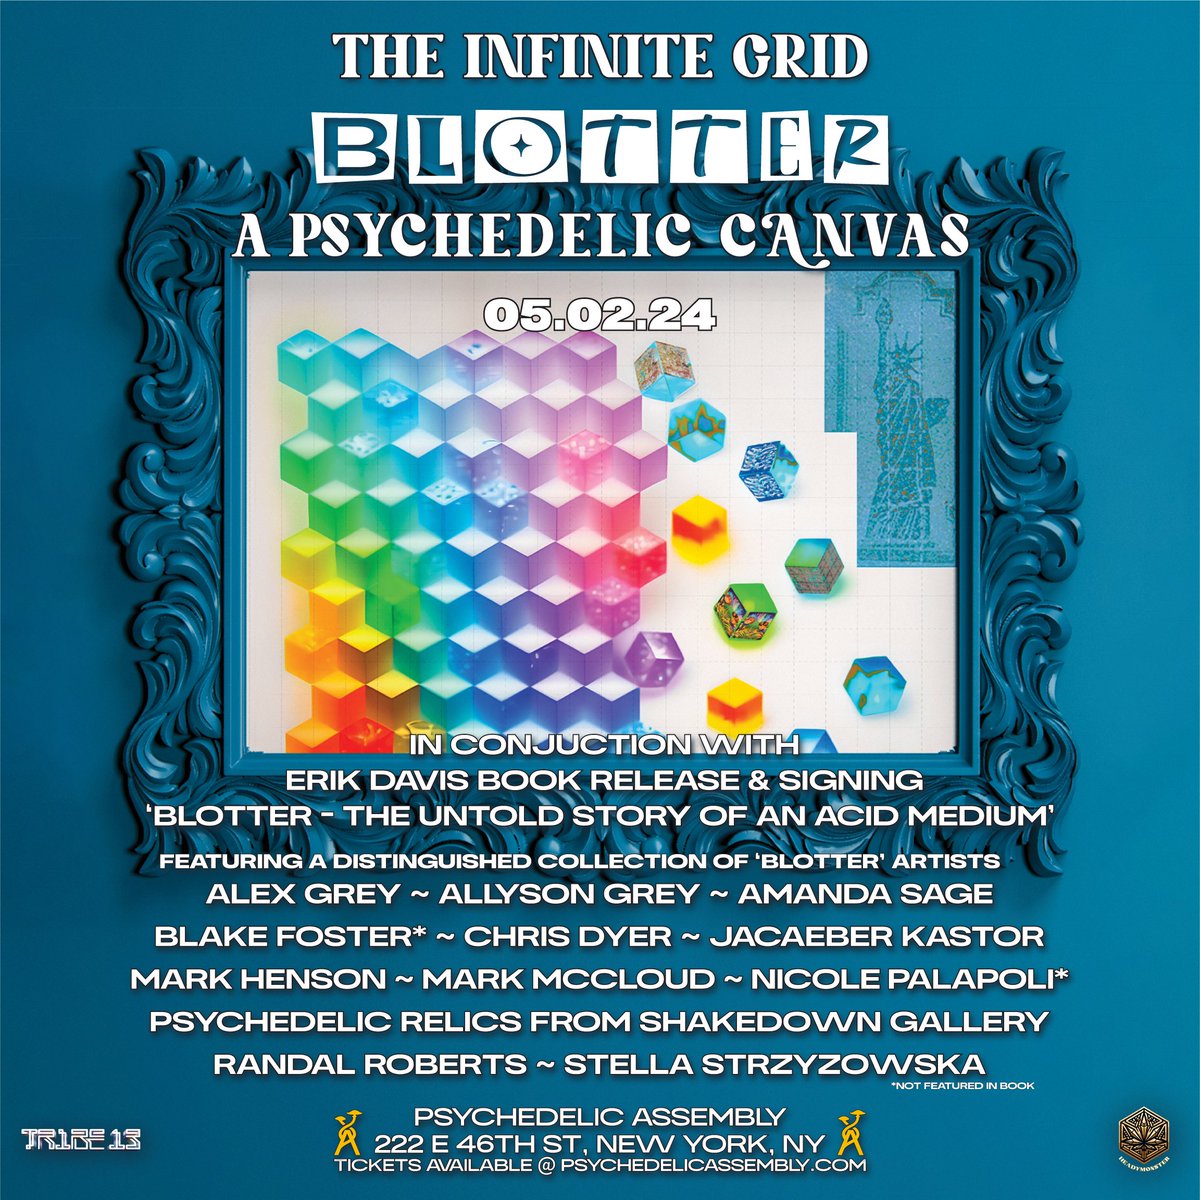 The Psychedelic Assembly is also hosting the Infinite Grid, a great visionary art show in conjunction with the Blotter event. I look forward to meeting all manner of characters...